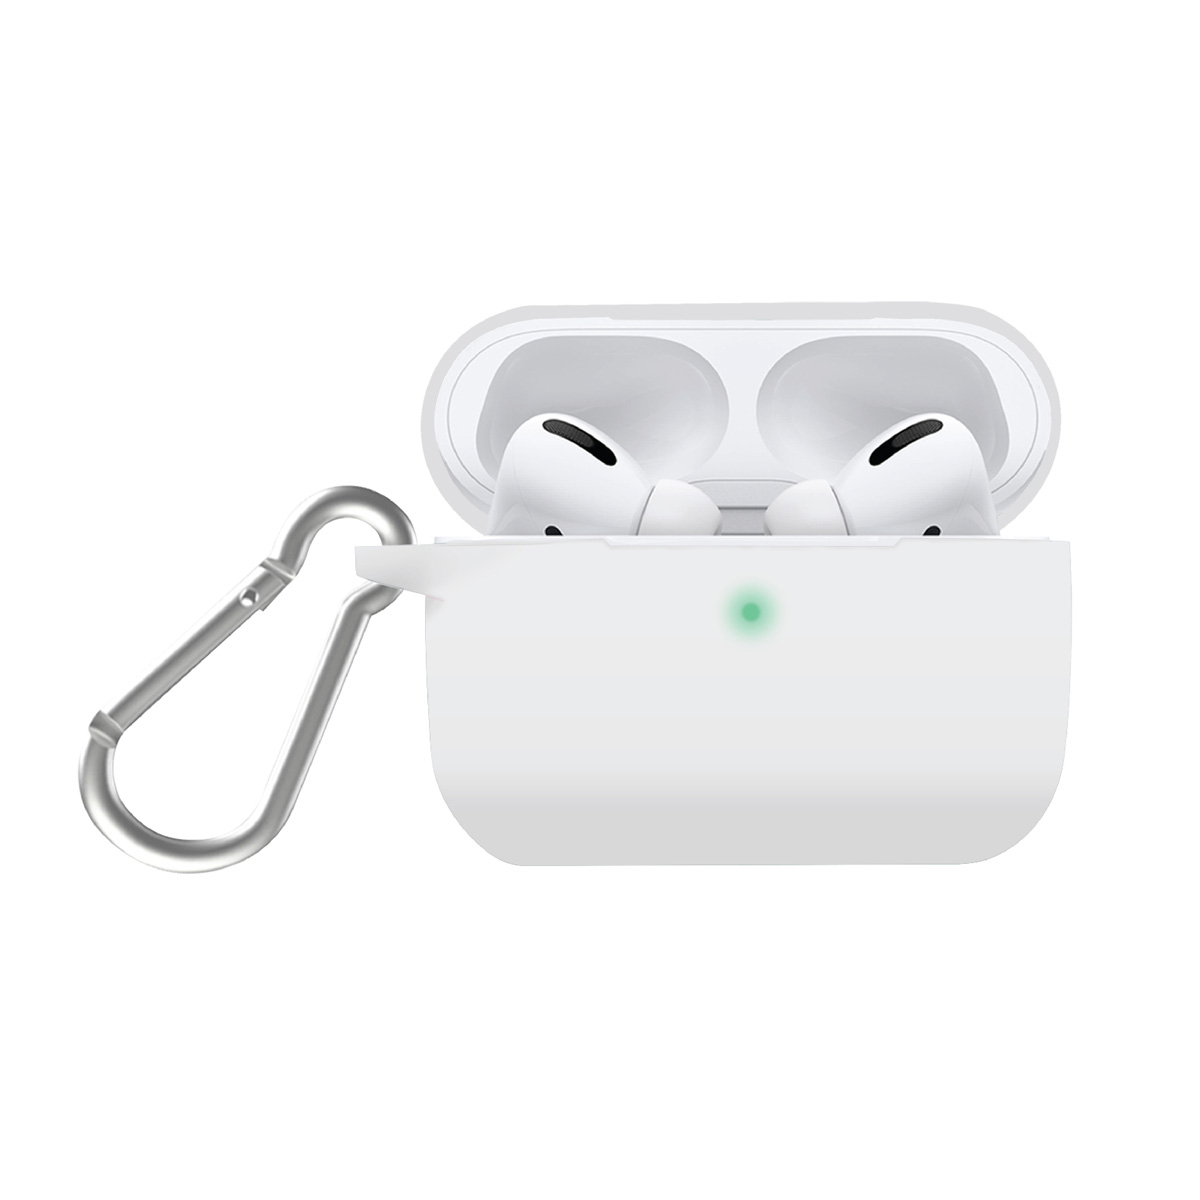 Promate Scratch & Drop Resistant Silicon Case for AirPods Pro (Silicase-Pro)WHITE